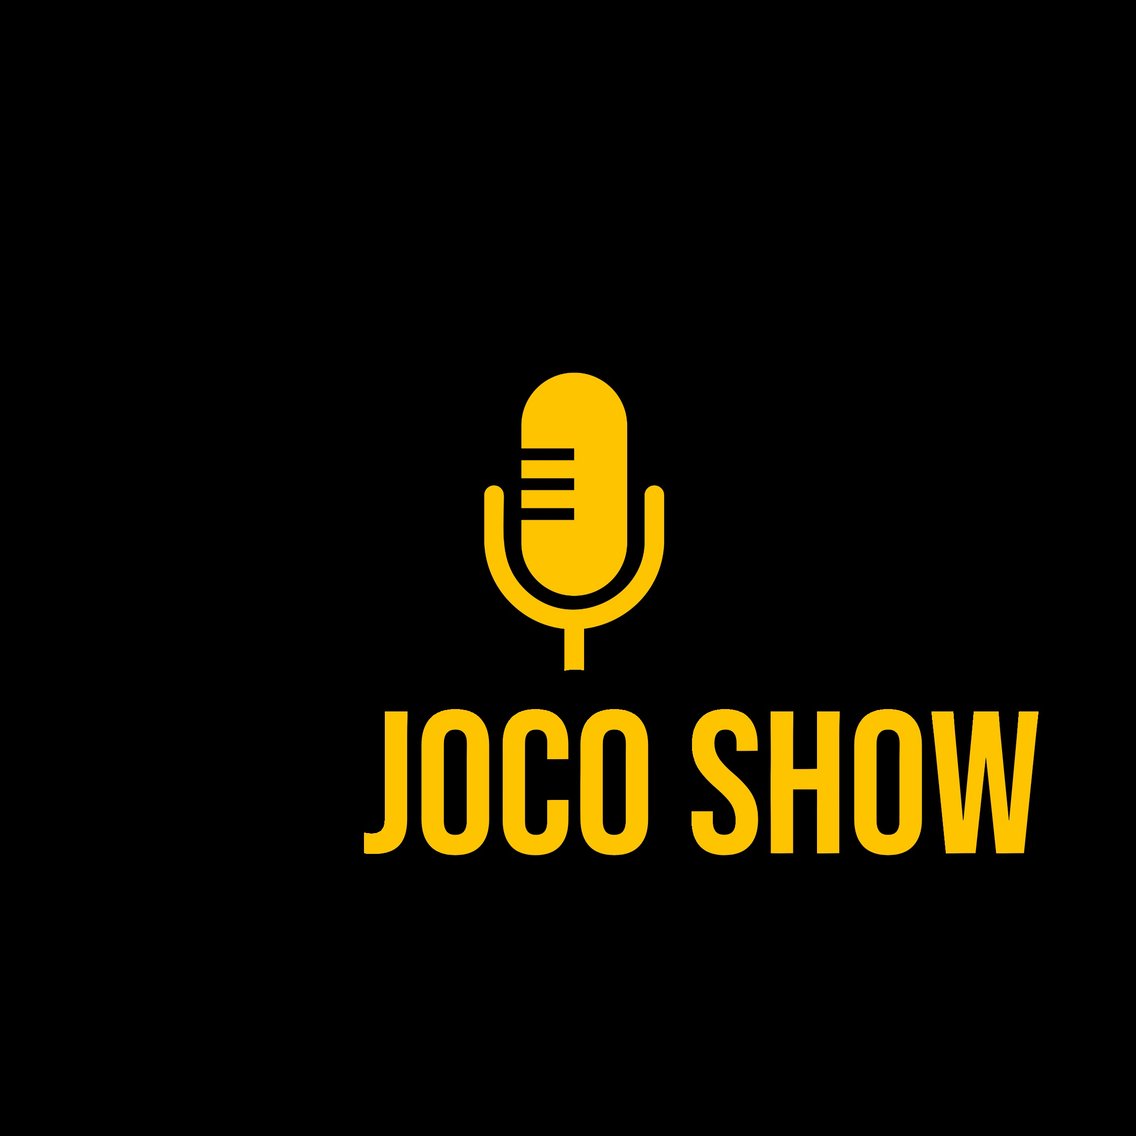 Episode 1: The Joco Show-No Snap, Just Chat - Cover Image